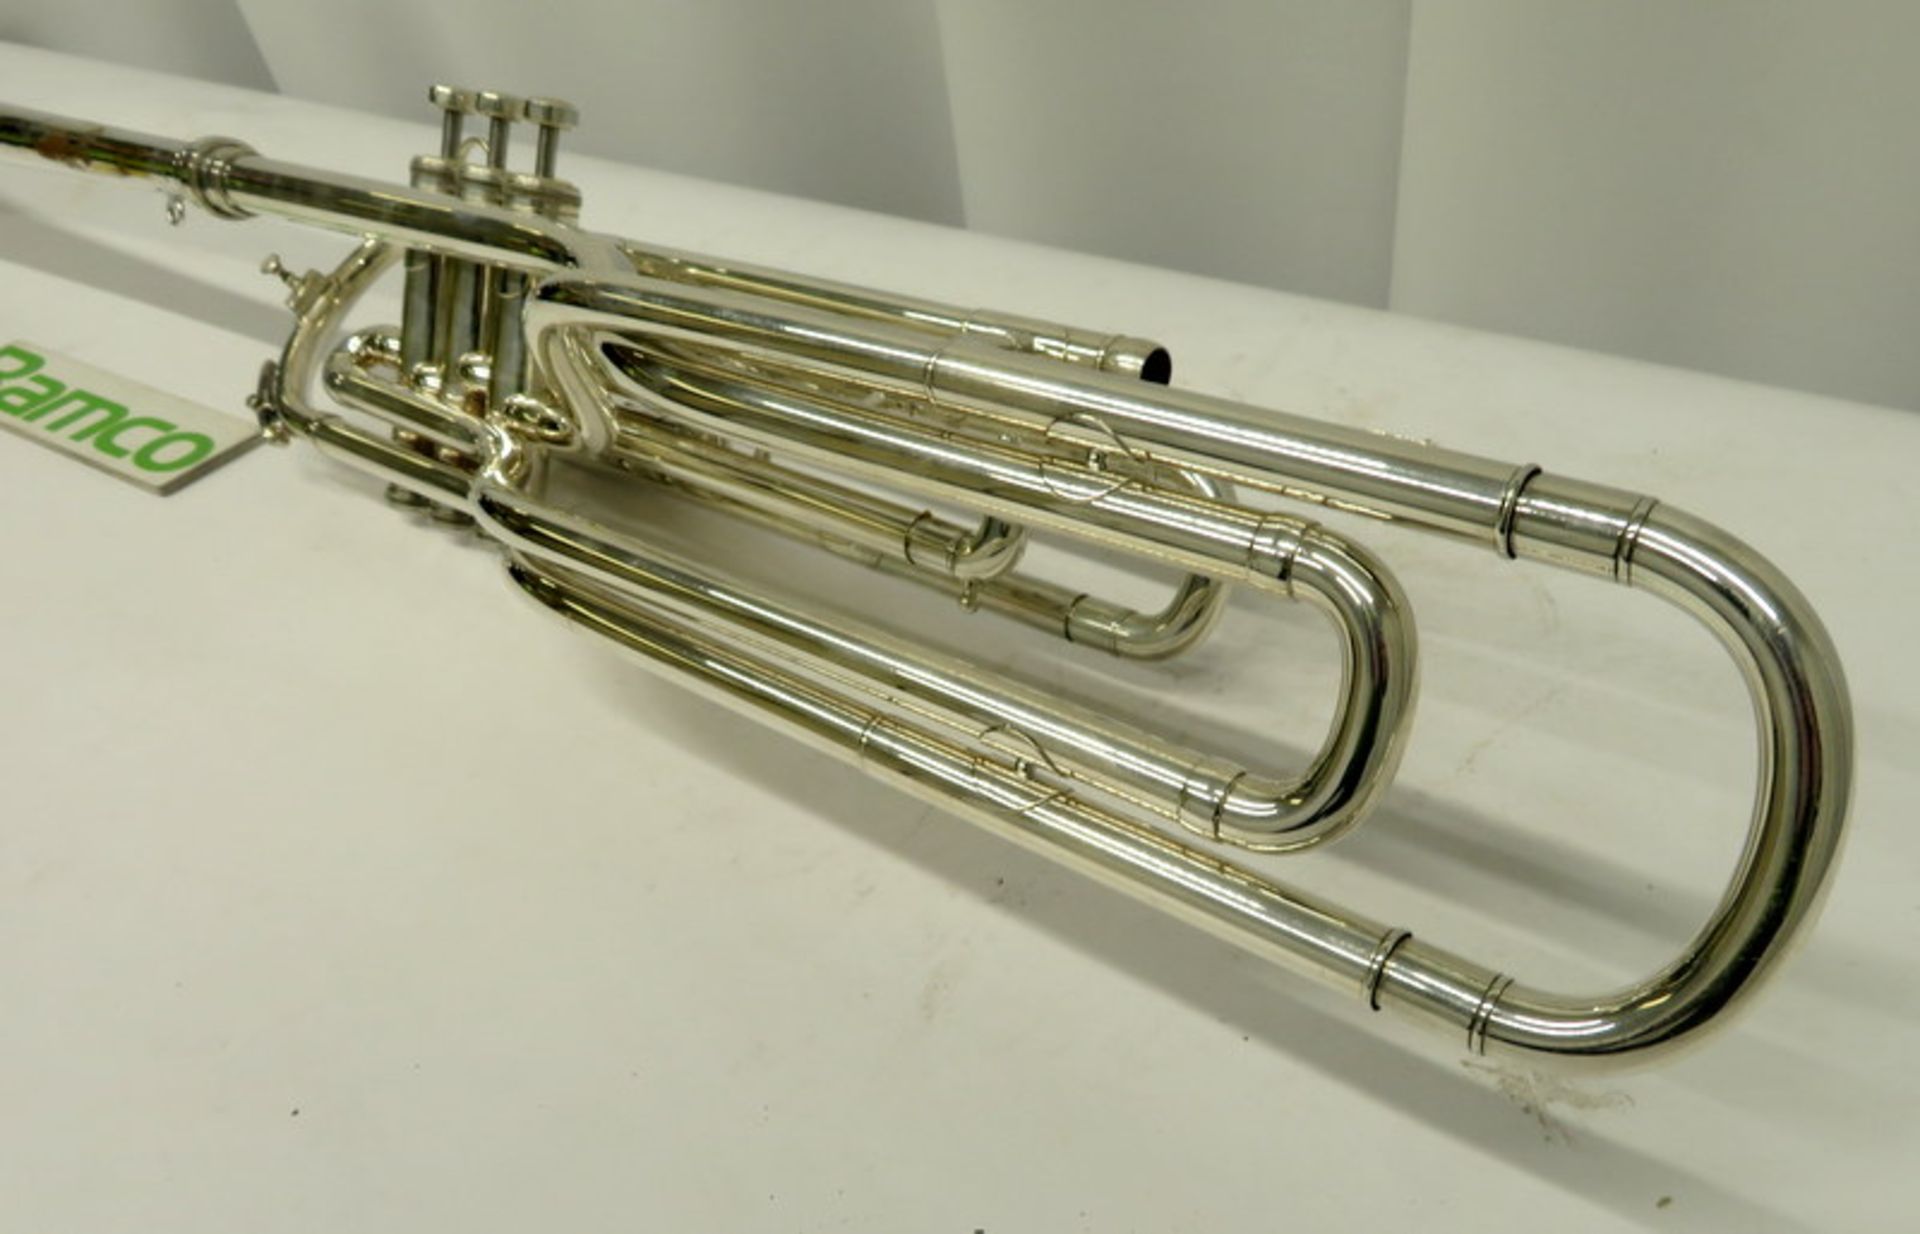 Besson 708 Fanfare Trumpet With Case. Serial Number: 785475. Please Note This Item Has Not - Image 8 of 16